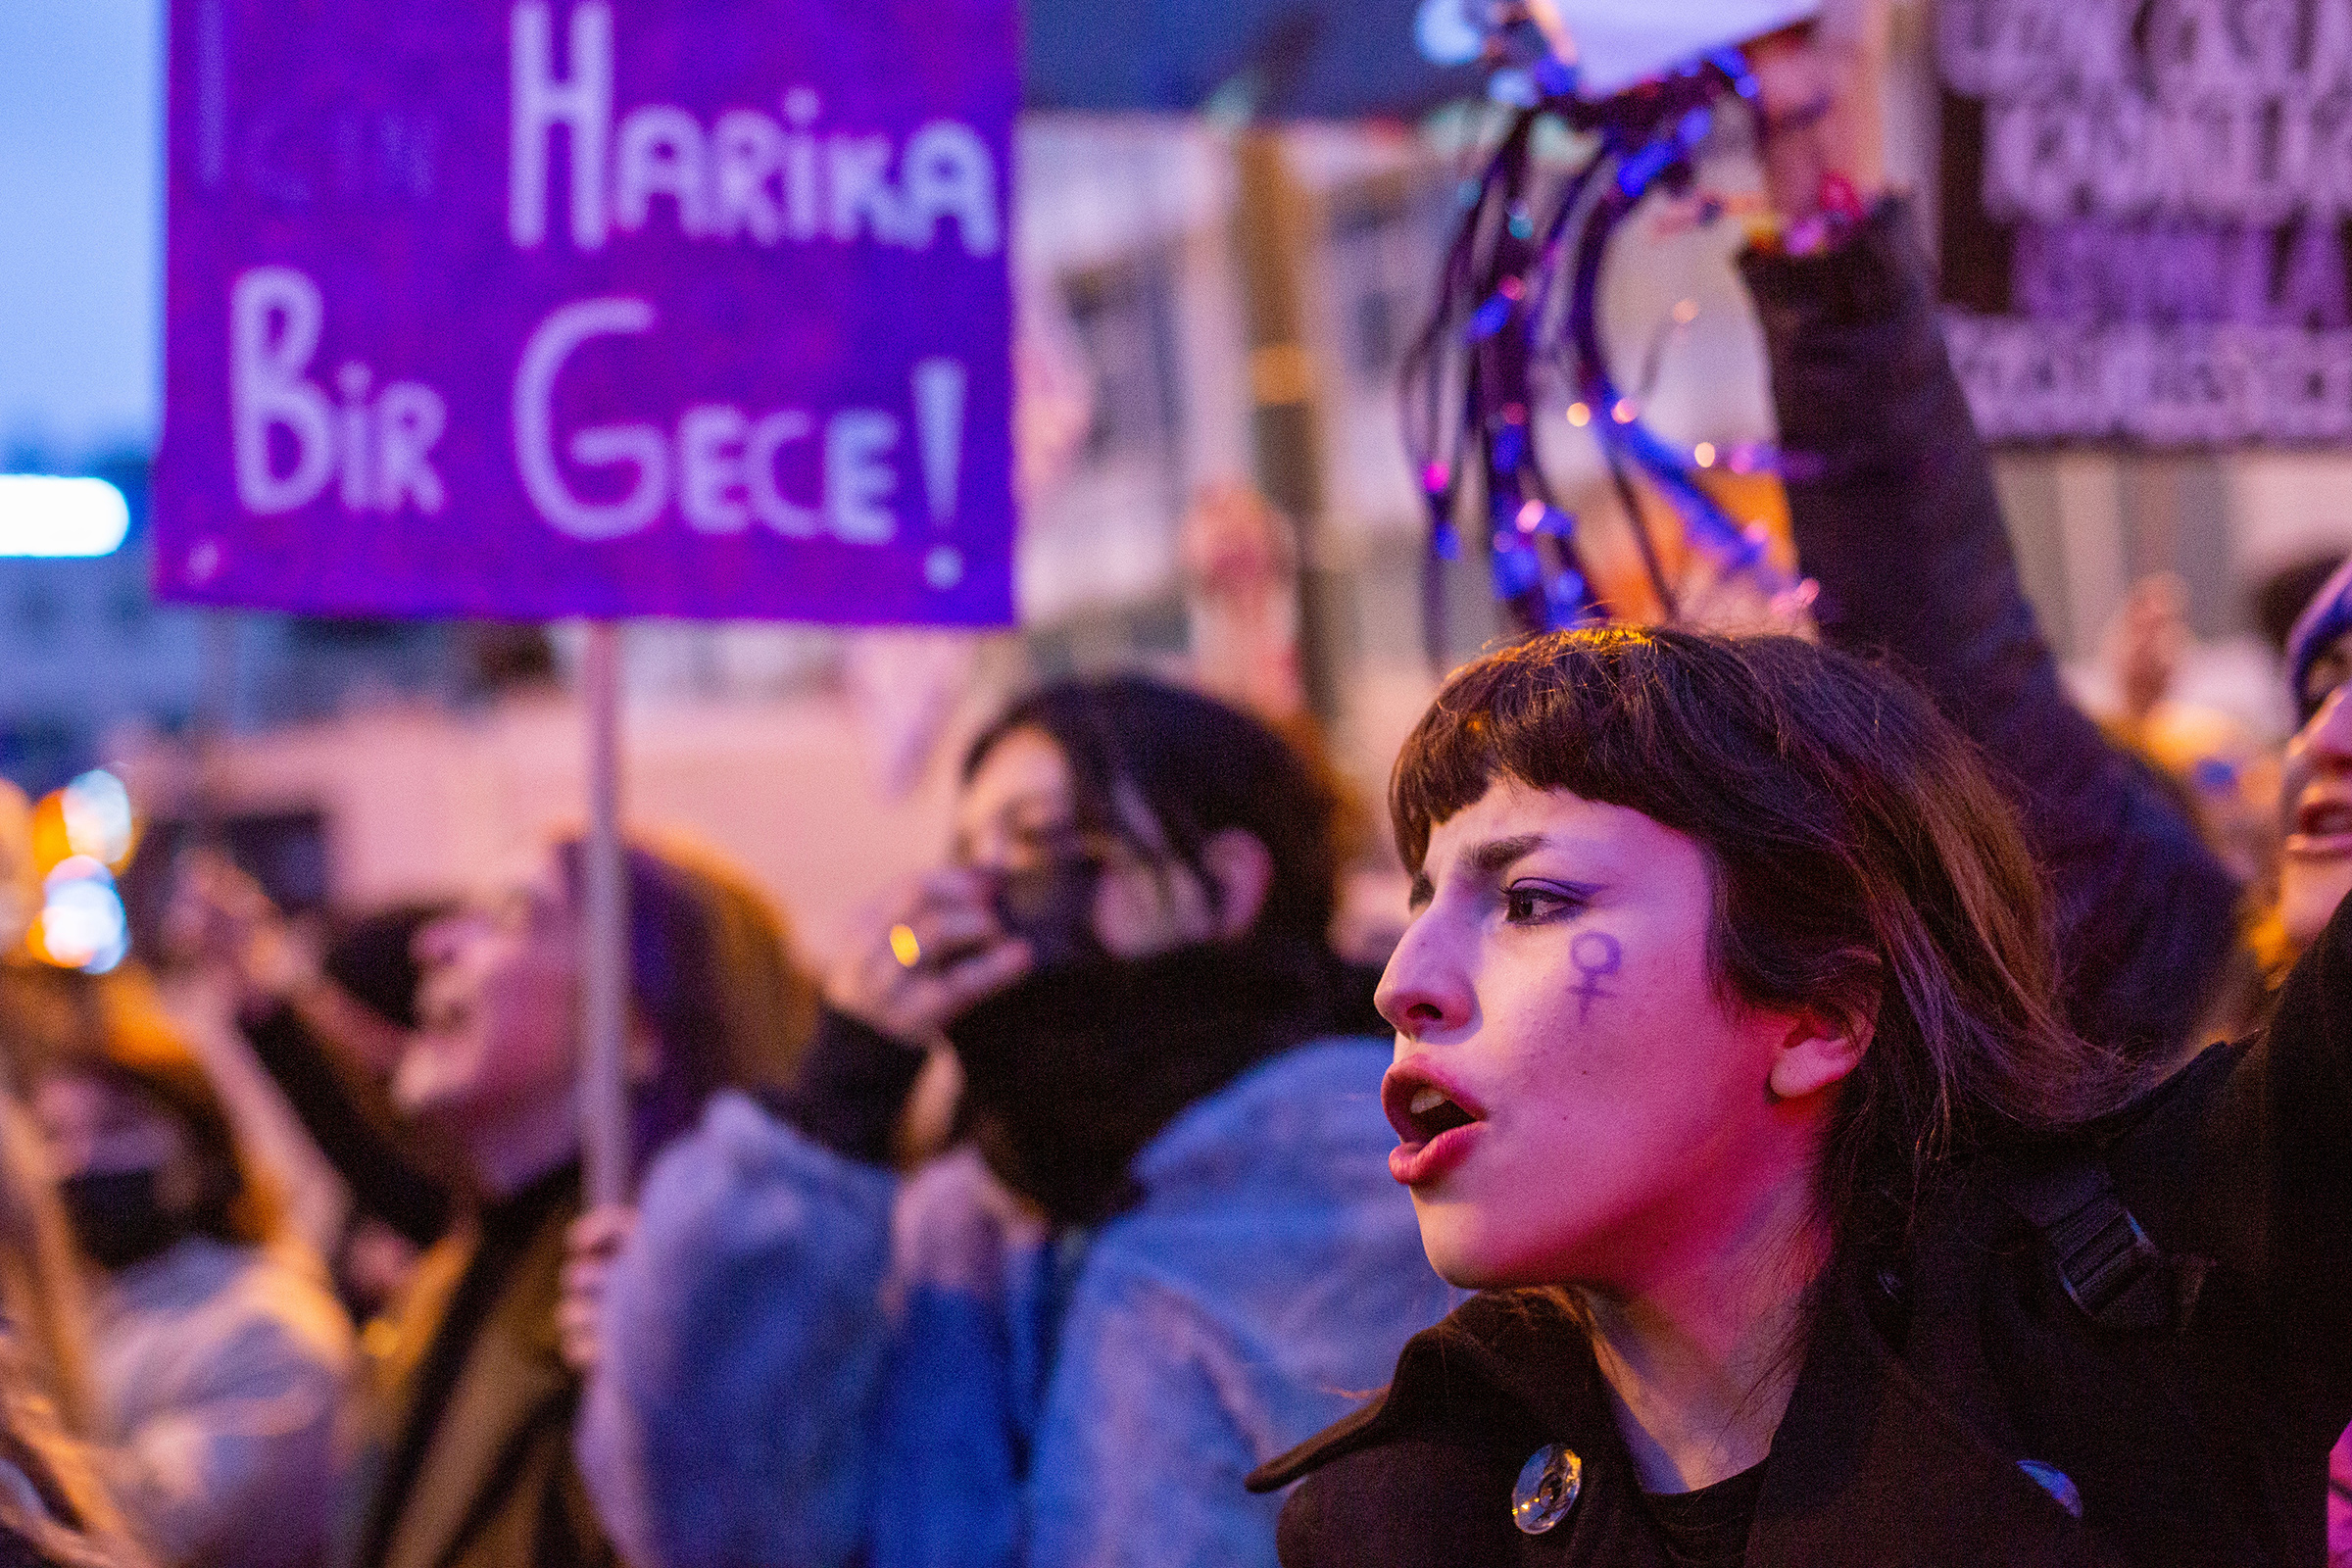 A protester shouts at a feminist night march in Istanbul on March 8, 2022. (Özge Sebzeci for the Fuller Project)